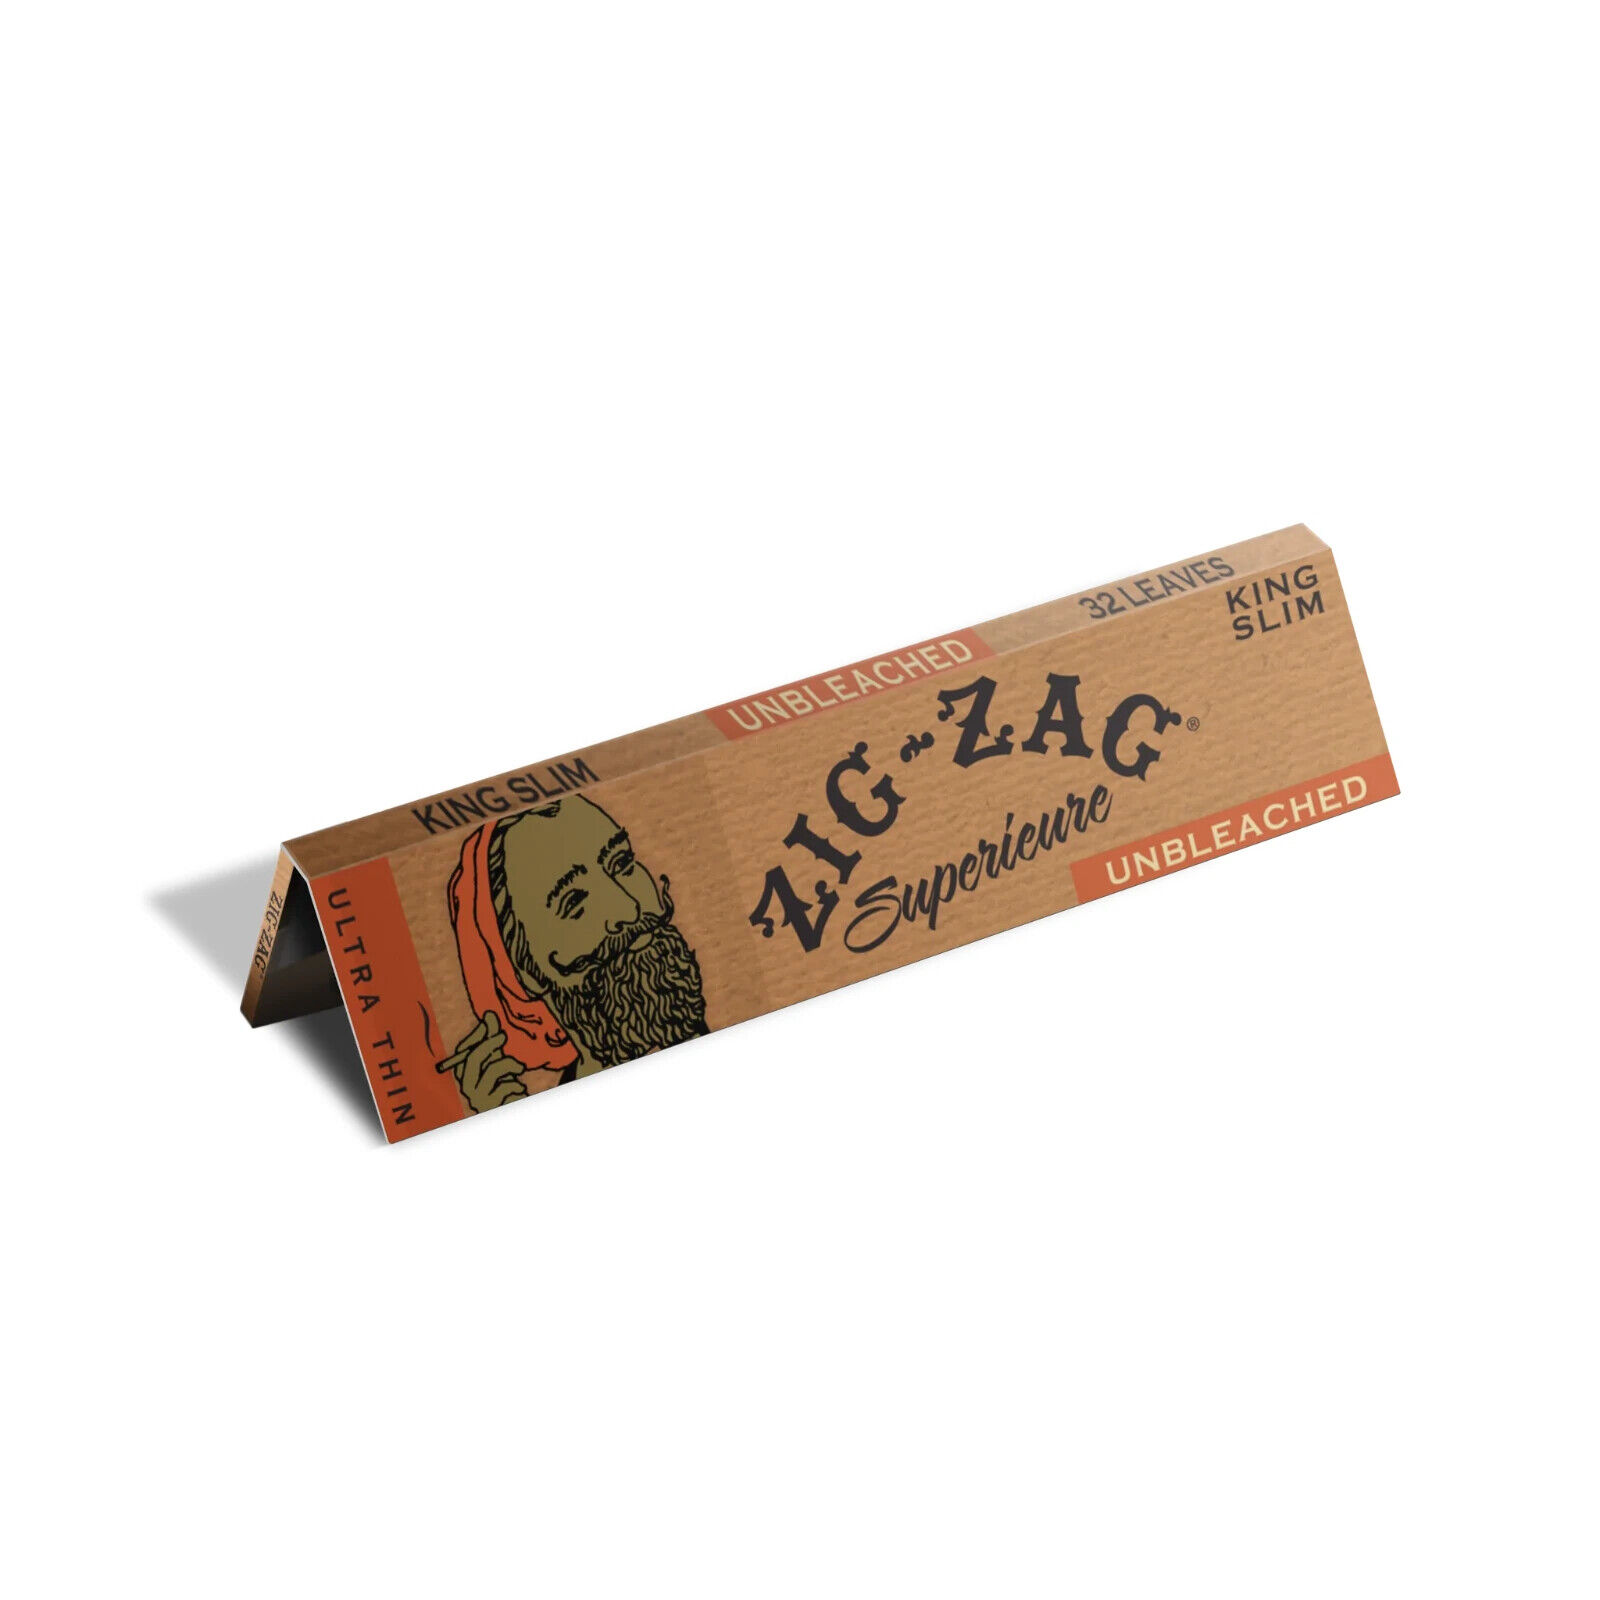 😎X4 ZIG ZAG UNBLEACHED SLIM KING SIZE CIGARETTE PAPERS✨4 BOOKLETS👀